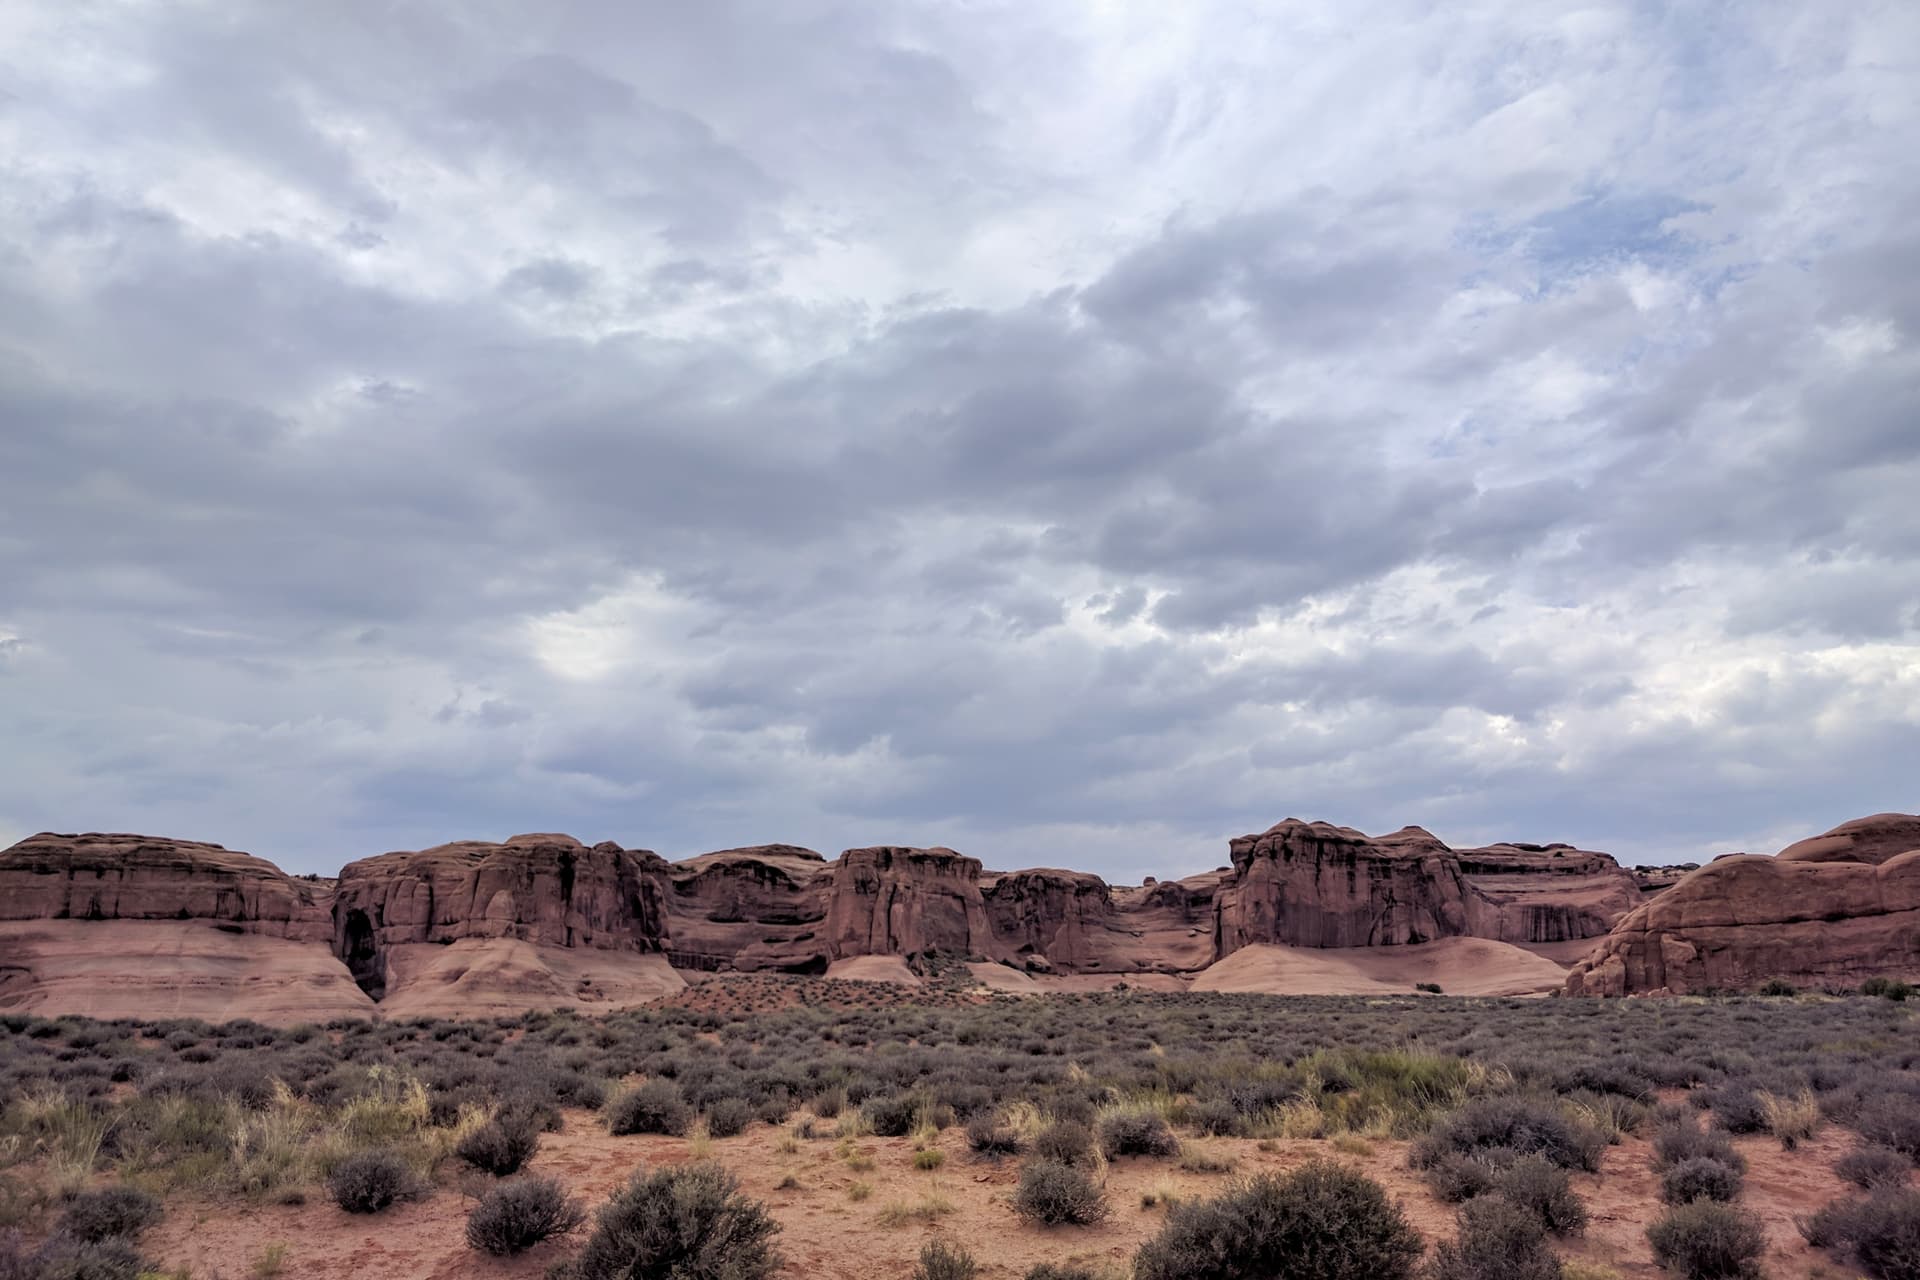 The undulating wall of a mesa near the entrance to Arches National Park.